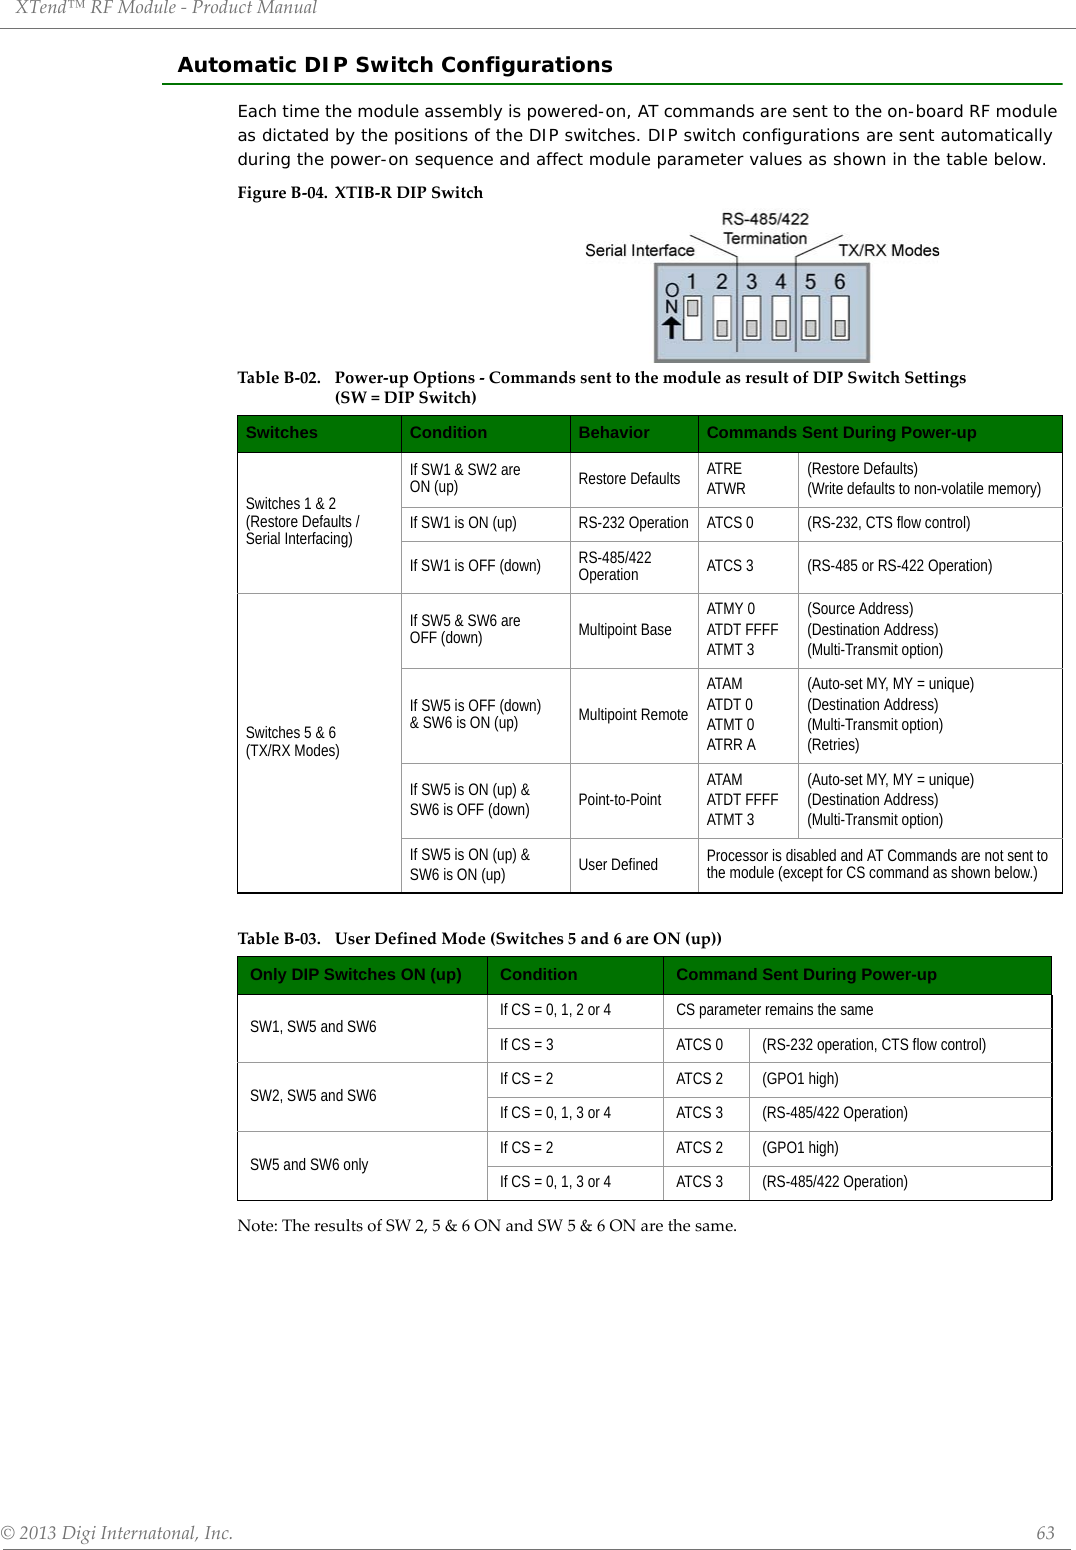 XTend™RFModule‐ProductManual©2013DigiInternatonal,Inc. 63Automatic DIP Switch ConfigurationsEach time the module assembly is powered-on, AT commands are sent to the on-board RF module as dictated by the positions of the DIP switches. DIP switch configurations are sent automatically during the power-on sequence and affect module parameter values as shown in the table below.FigureB‐04. XTIB‐RDIPSwitchNote:TheresultsofSW2,5&amp;6ONandSW5&amp;6ONarethesame.TableB‐02. Power‐upOptions‐CommandssenttothemoduleasresultofDIPSwitchSettings(SW=DIPSwitch)Switches Condition Behavior Commands Sent During Power-upSwitches 1 &amp; 2(Restore Defaults /Serial Interfacing)If SW1 &amp; SW2 are ON (up) Restore Defaults ATRE ATWR (Restore Defaults)(Write defaults to non-volatile memory)If SW1 is ON (up) RS-232 Operation ATCS 0  (RS-232, CTS flow control)If SW1 is OFF (down) RS-485/422 Operation ATCS 3  (RS-485 or RS-422 Operation)Switches 5 &amp; 6 (TX/RX Modes)If SW5 &amp; SW6 are OFF (down)  Multipoint Base ATMY 0ATDT FFFFATMT 3(Source Address)(Destination Address)(Multi-Transmit option)If SW5 is OFF (down) &amp; SW6 is ON (up) Multipoint RemoteATAM ATDT 0ATMT 0ATRR A (Auto-set MY, MY = unique)(Destination Address)(Multi-Transmit option)(Retries)If SW5 is ON (up) &amp; SW6 is OFF (down) Point-to-PointATAM ATDT FFFFATMT 3 (Auto-set MY, MY = unique)(Destination Address)(Multi-Transmit option)If SW5 is ON (up) &amp; SW6 is ON (up) User Defined Processor is disabled and AT Commands are not sent to the module (except for CS command as shown below.)TableB‐03. UserDefinedMode(Switches5and6areON(up))Only DIP Switches ON (up) Condition Command Sent During Power-upSW1, SW5 and SW6 If CS = 0, 1, 2 or 4 CS parameter remains the sameIf CS = 3 ATCS 0 (RS-232 operation, CTS flow control)SW2, SW5 and SW6 If CS = 2 ATCS 2 (GPO1 high)If CS = 0, 1, 3 or 4 ATCS 3 (RS-485/422 Operation)SW5 and SW6 only If CS = 2 ATCS 2 (GPO1 high)If CS = 0, 1, 3 or 4 ATCS 3 (RS-485/422 Operation)